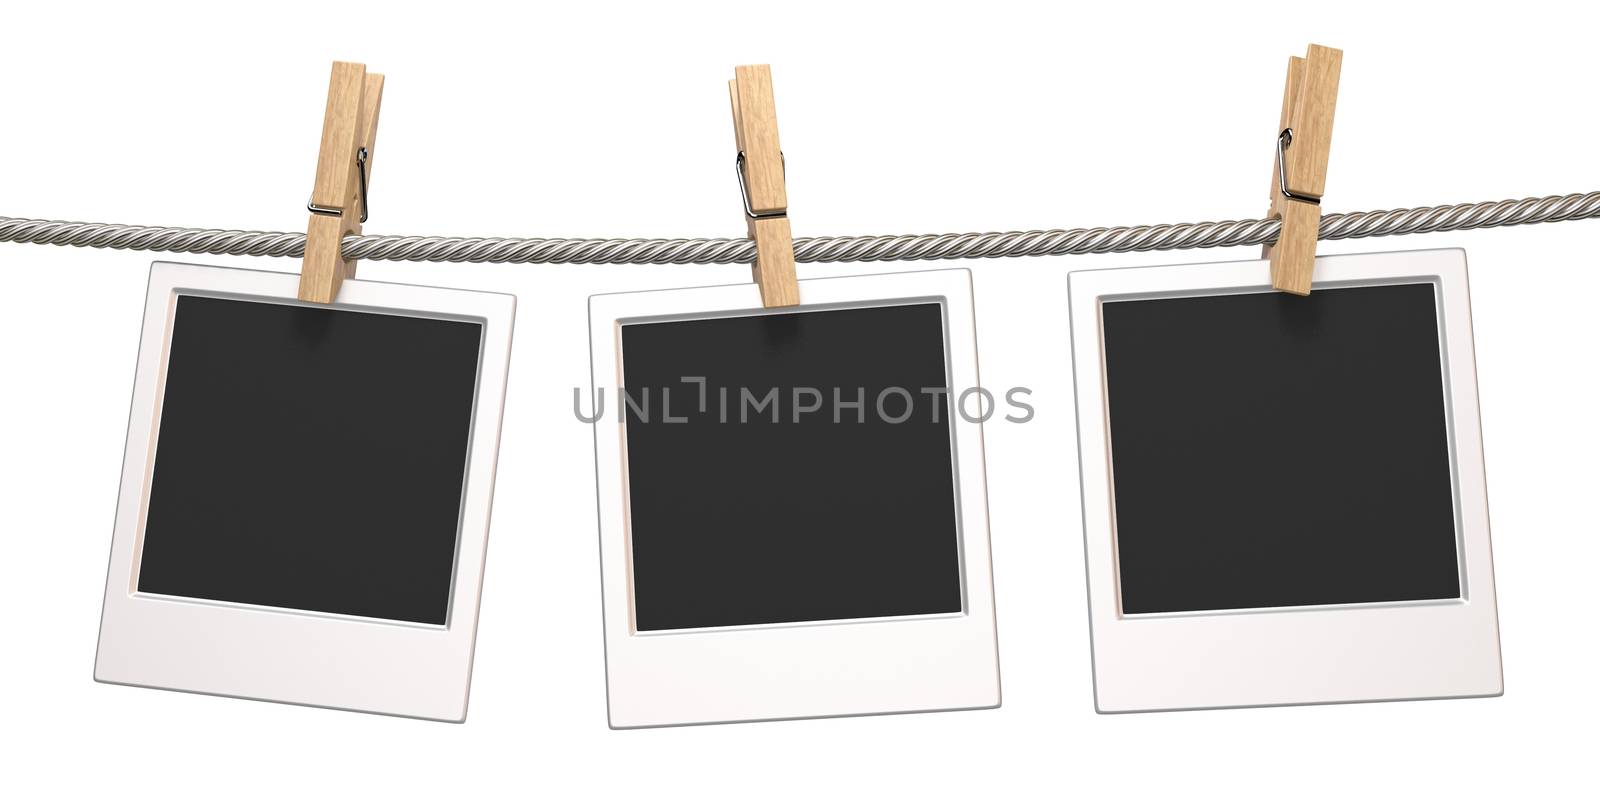 Clothes pin and three blank photo papers hanging on rope 3D render illustration isolated on white background